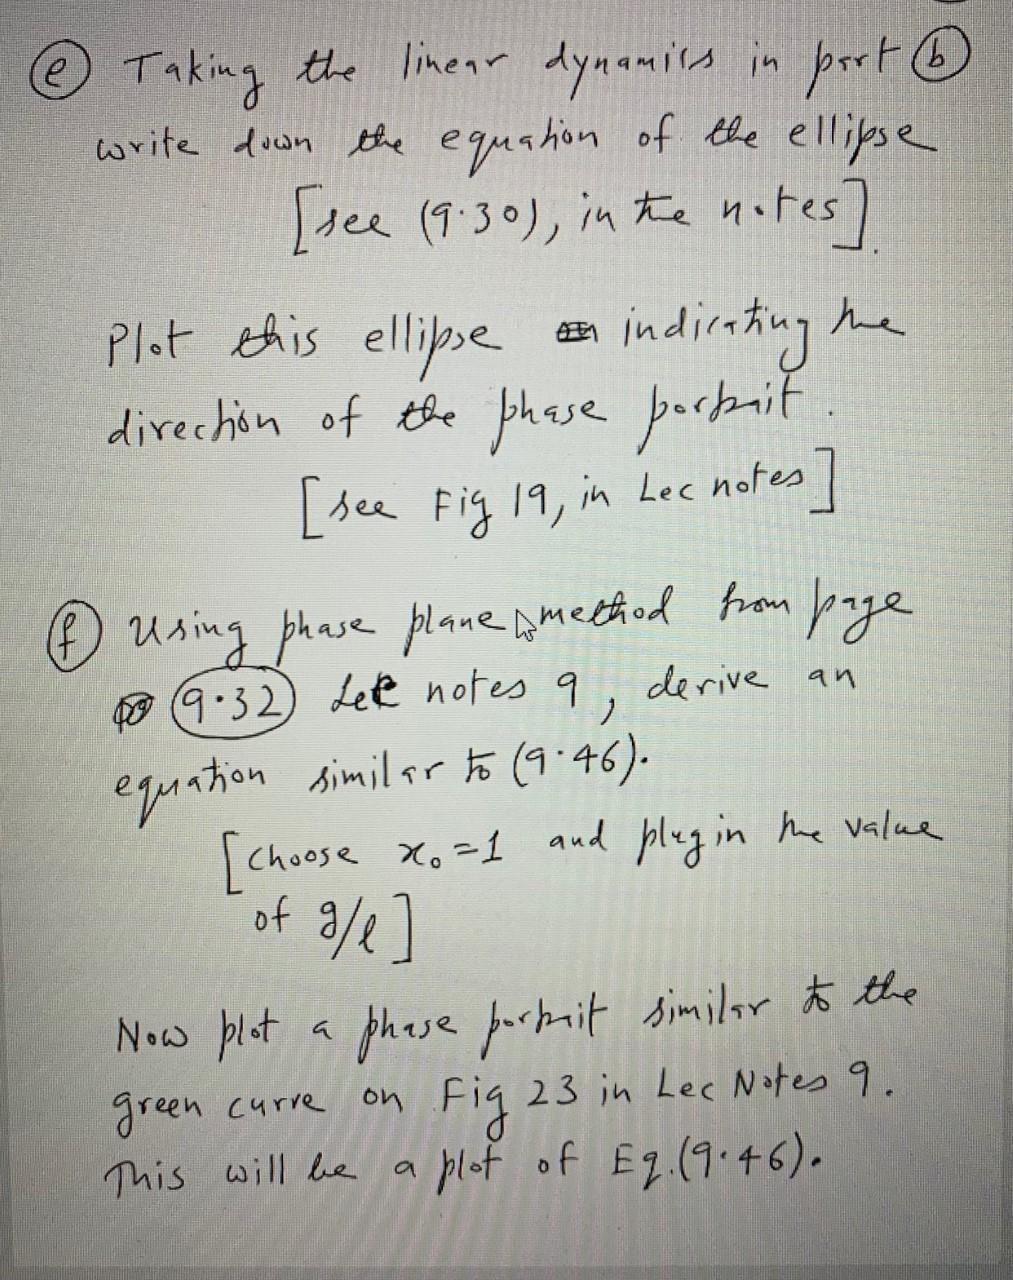 Taking the linear dynamics in part 6 write down the equation of the ellipse [see (9.30), in the notes Plot this ellipse direc